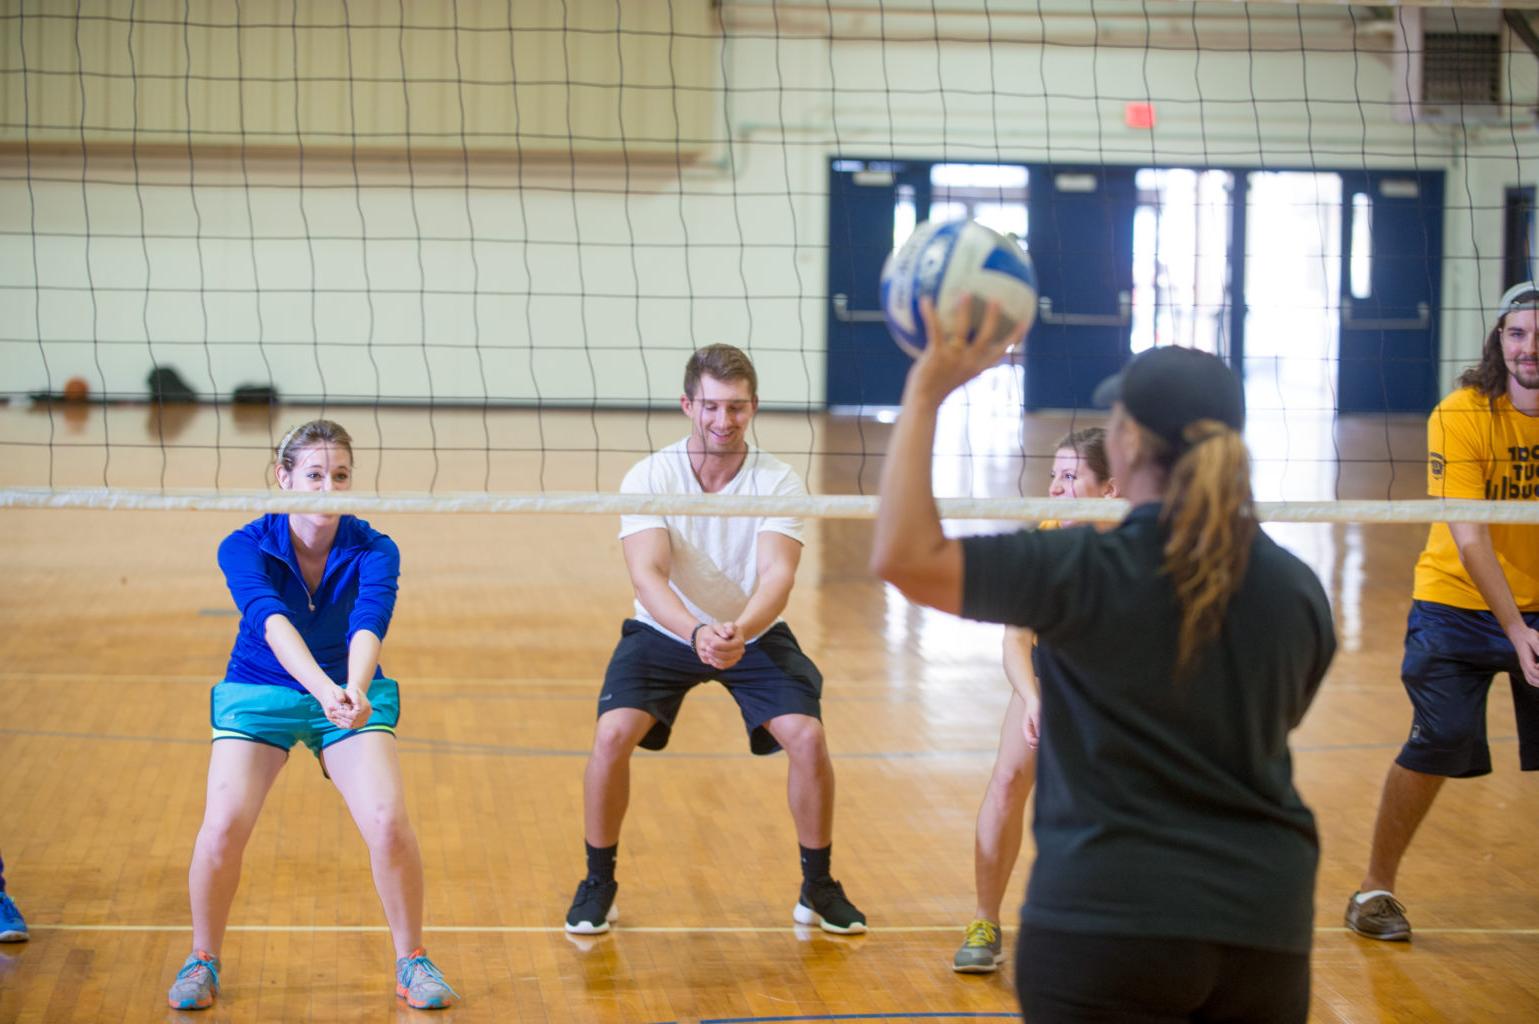 Student learning volleyball inside the Gym in the Commerce campus.